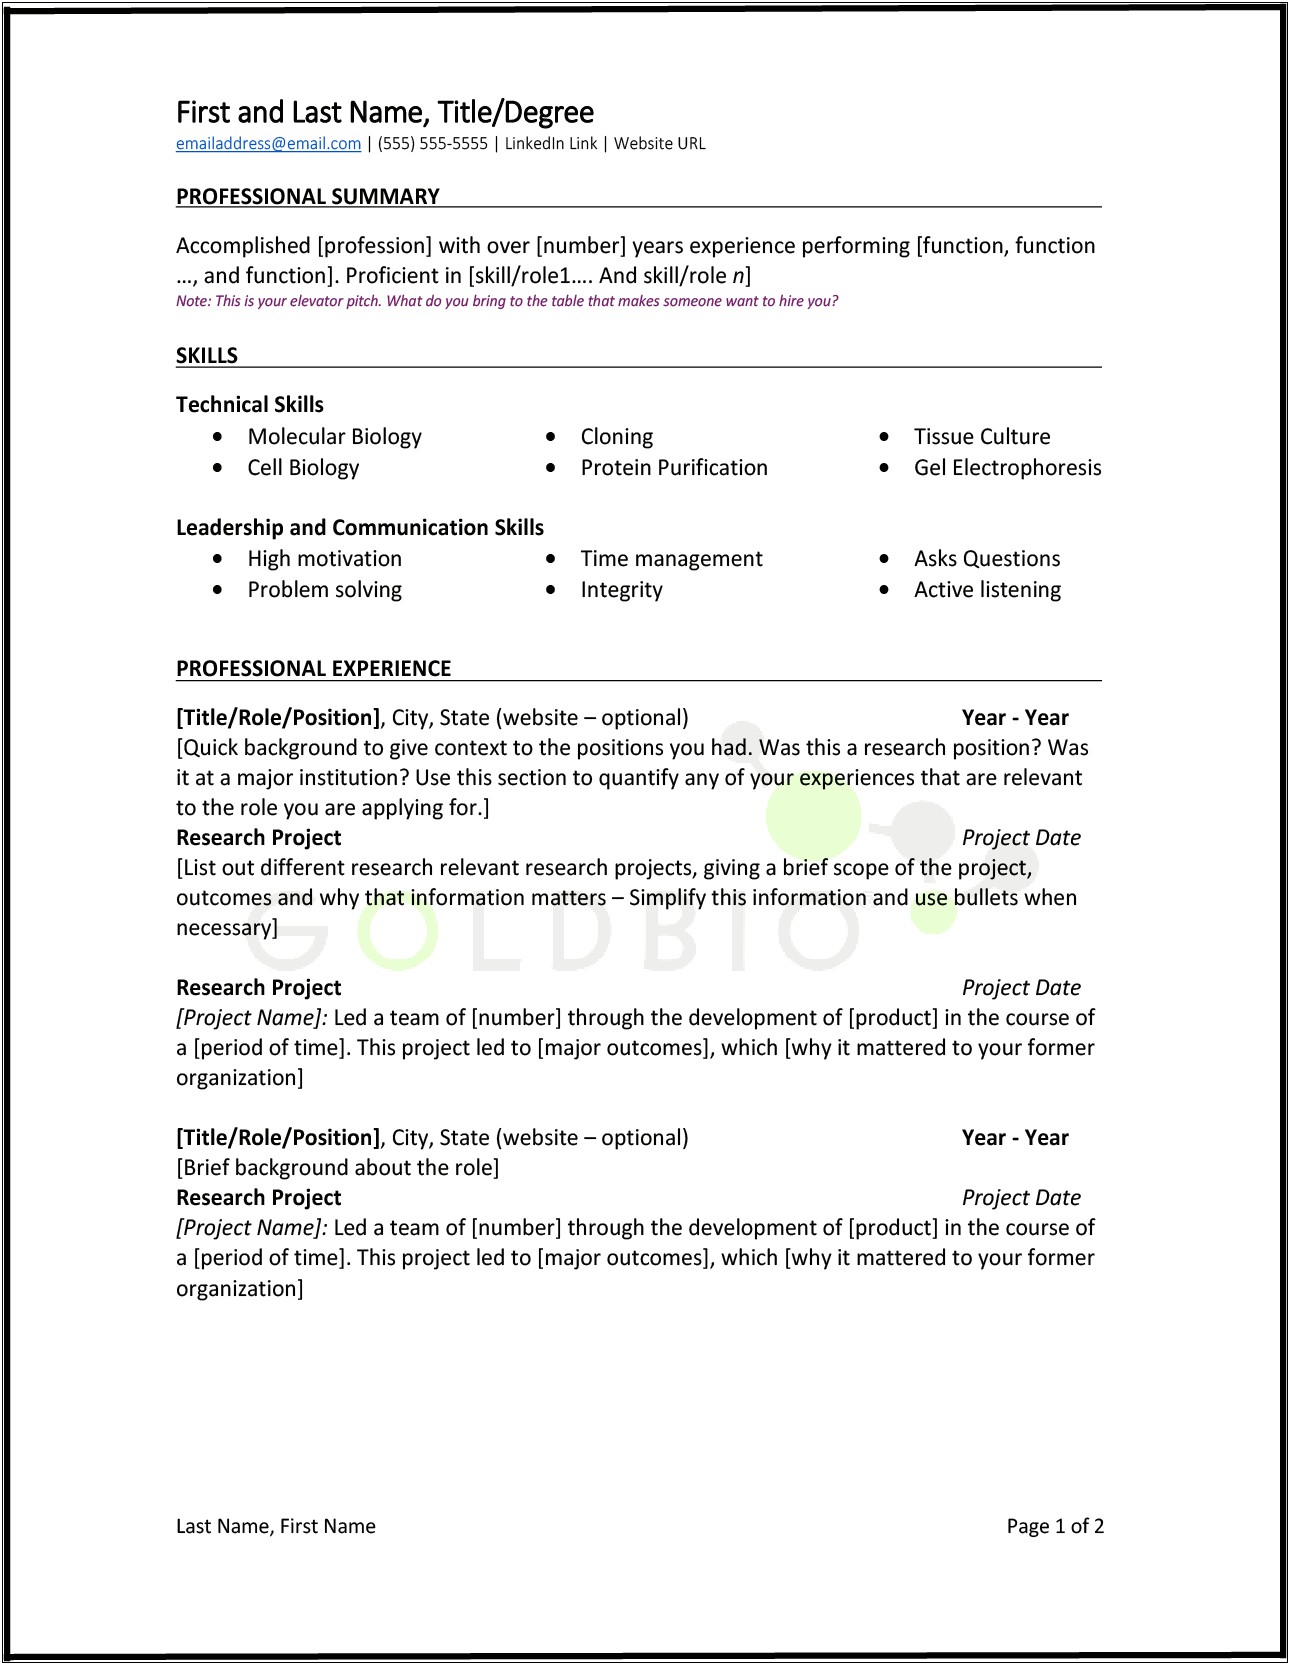 Resume Format For 3 Months Experience